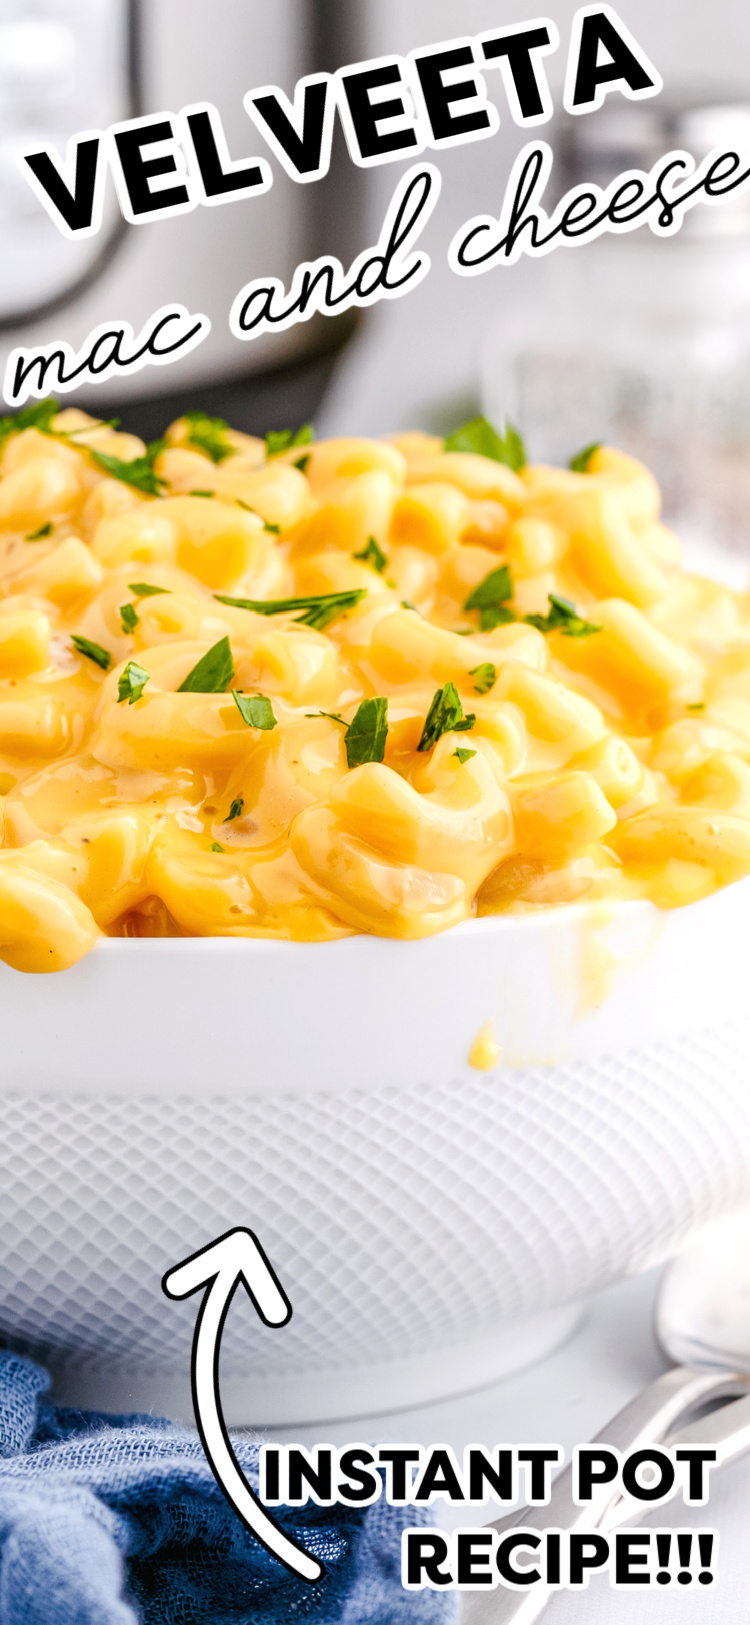 This Instant Pot Velveeta Mac and Cheese recipe is so creamy and delicious that you’ll never want to make stovetop again. It’s great for a meal or as a side to any lunch or dinner entrée. via @foodfolksandfun